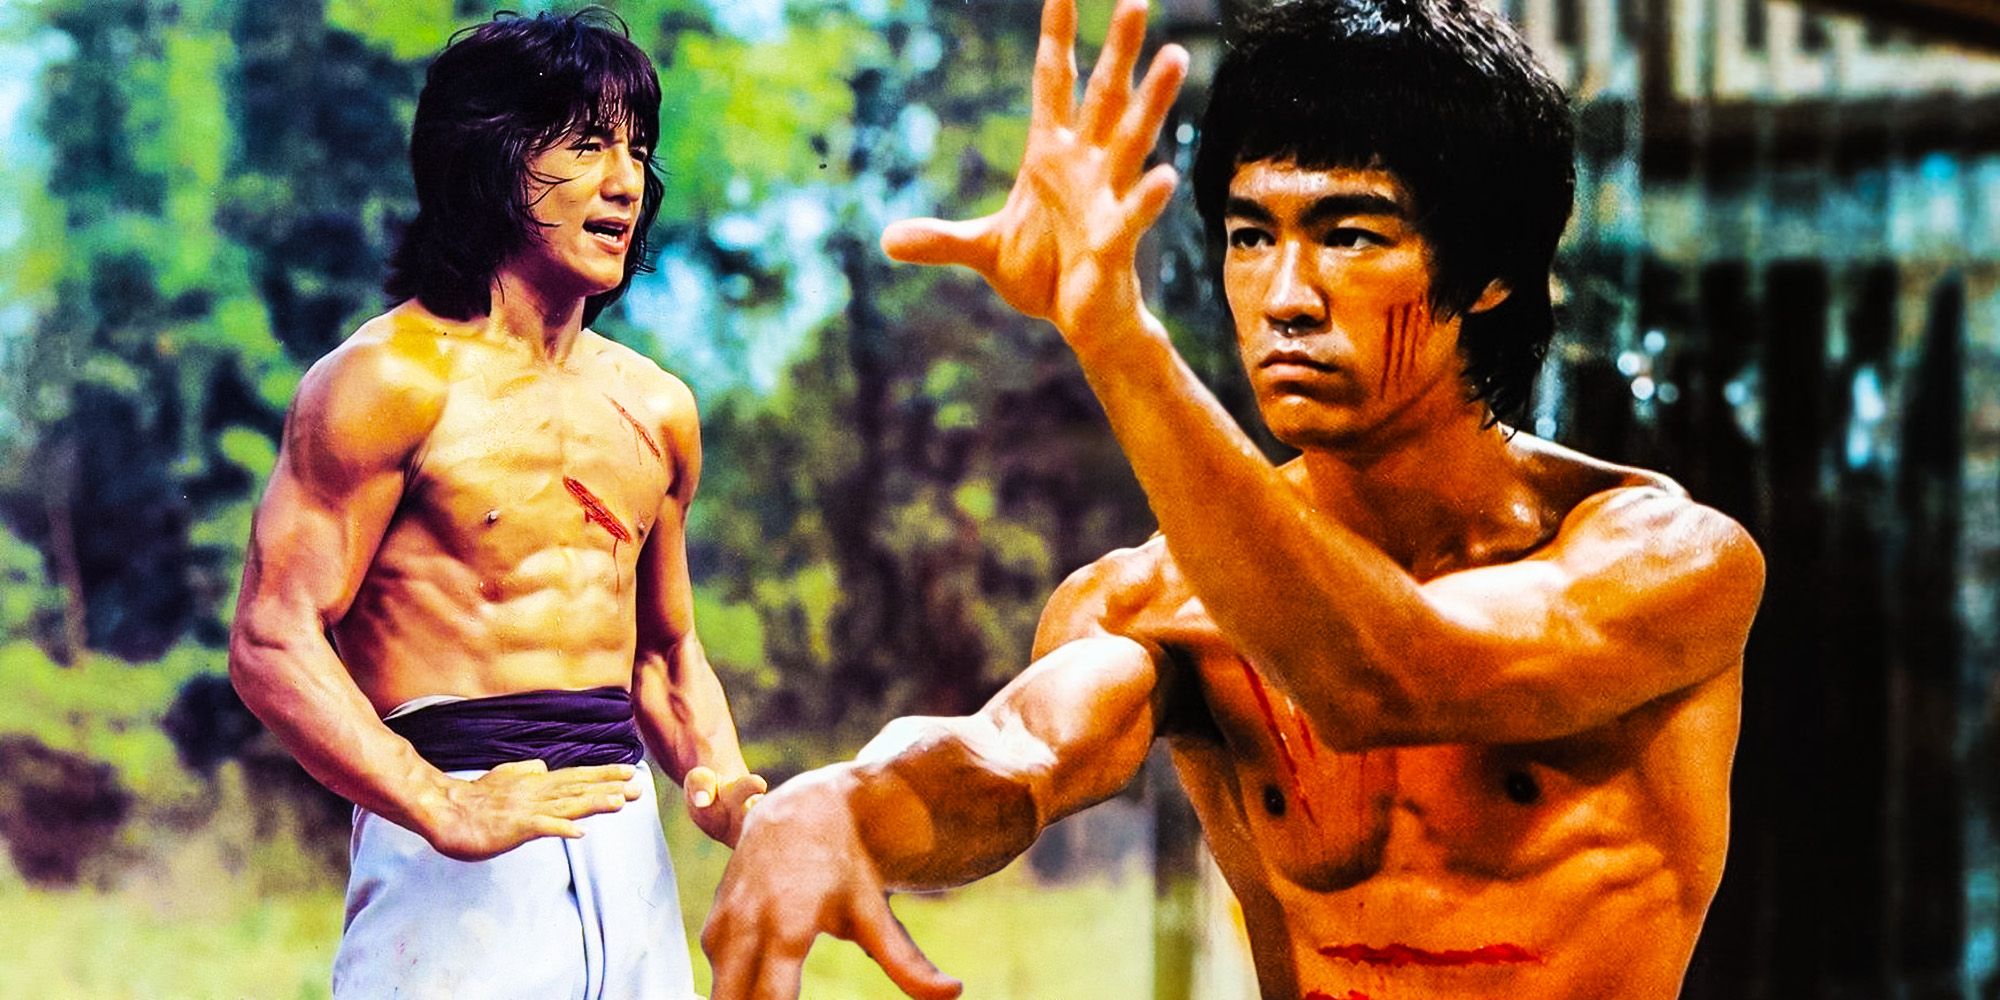 Bruce Lee vs. Jackie Chan: Who Would've Won In A Fight